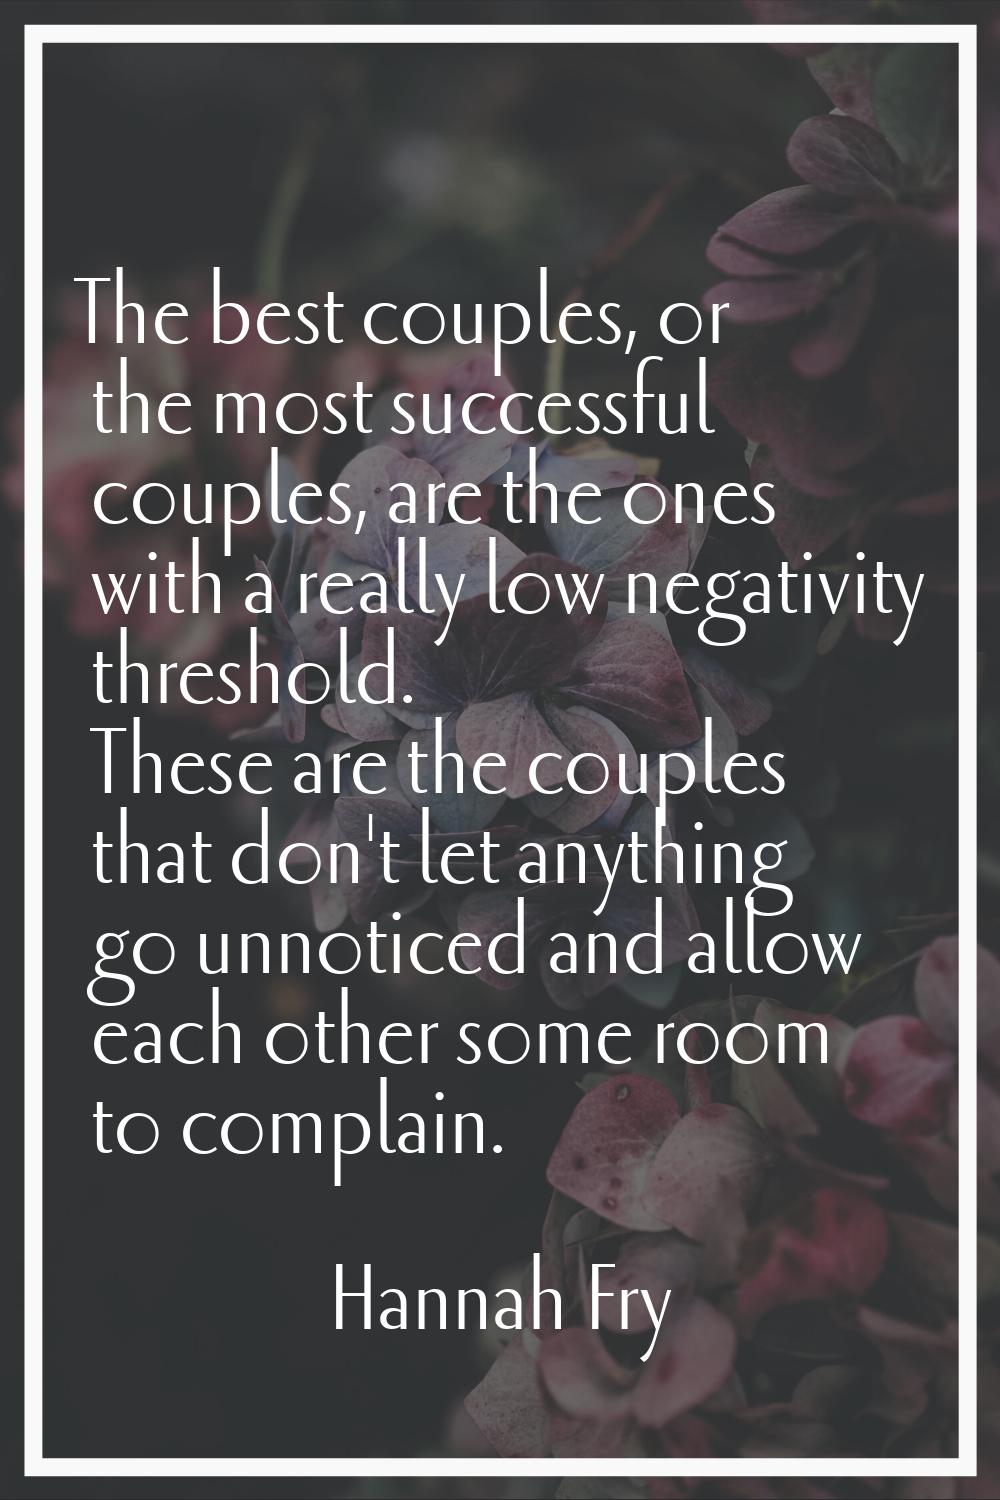 The best couples, or the most successful couples, are the ones with a really low negativity thresho